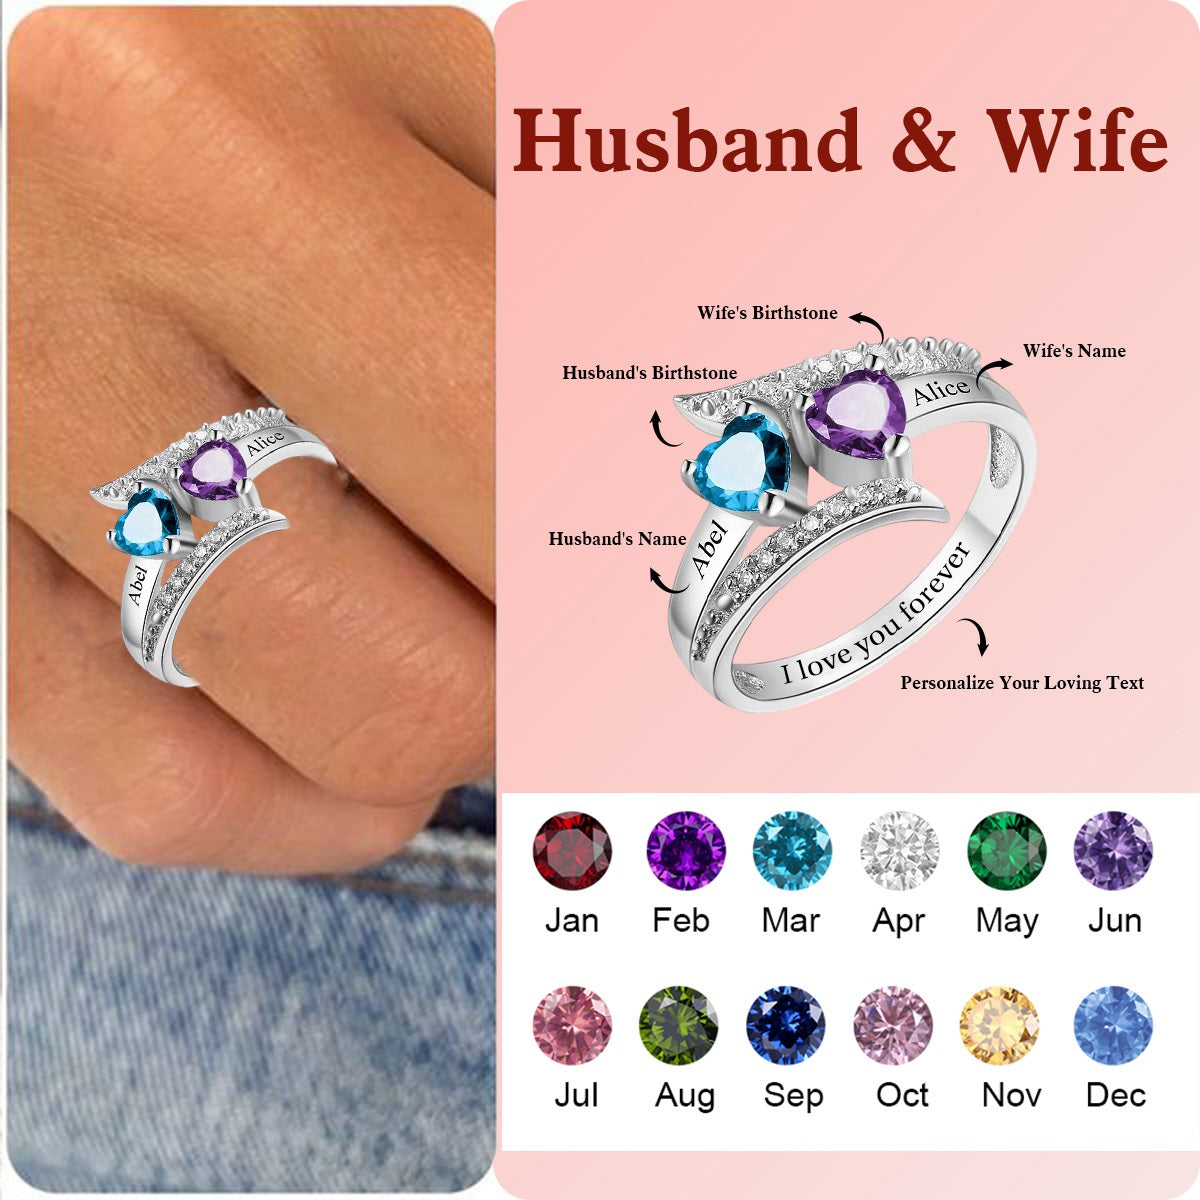 I Love You Forever - Personalized Promise Birthstones Sterling Silver Ring